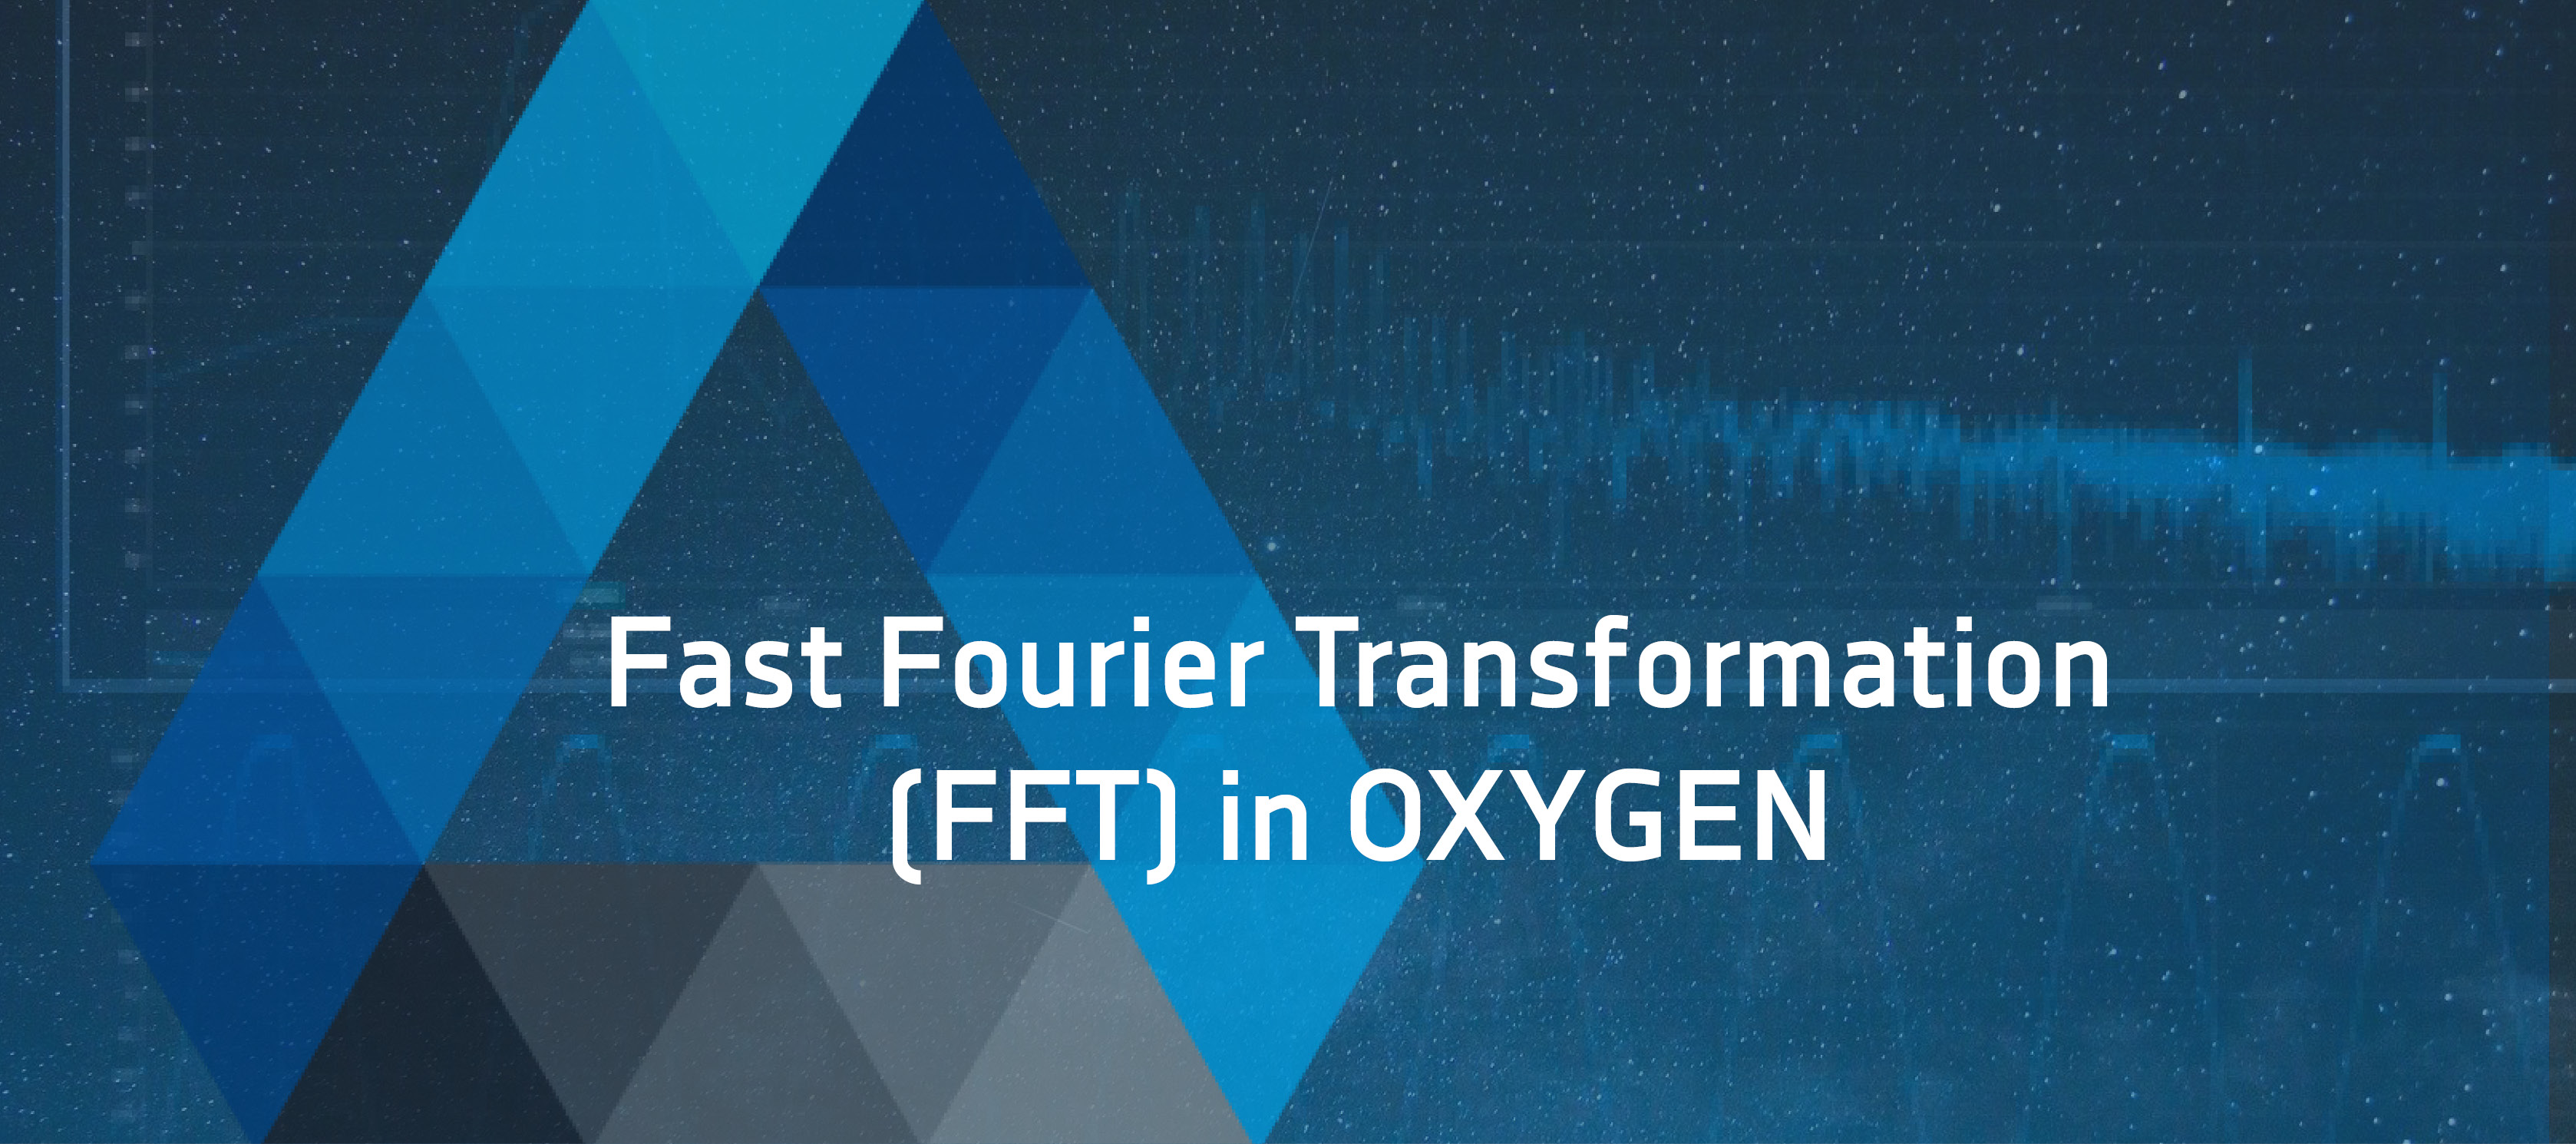 Fast Fourier Transformation (FFT) Intro